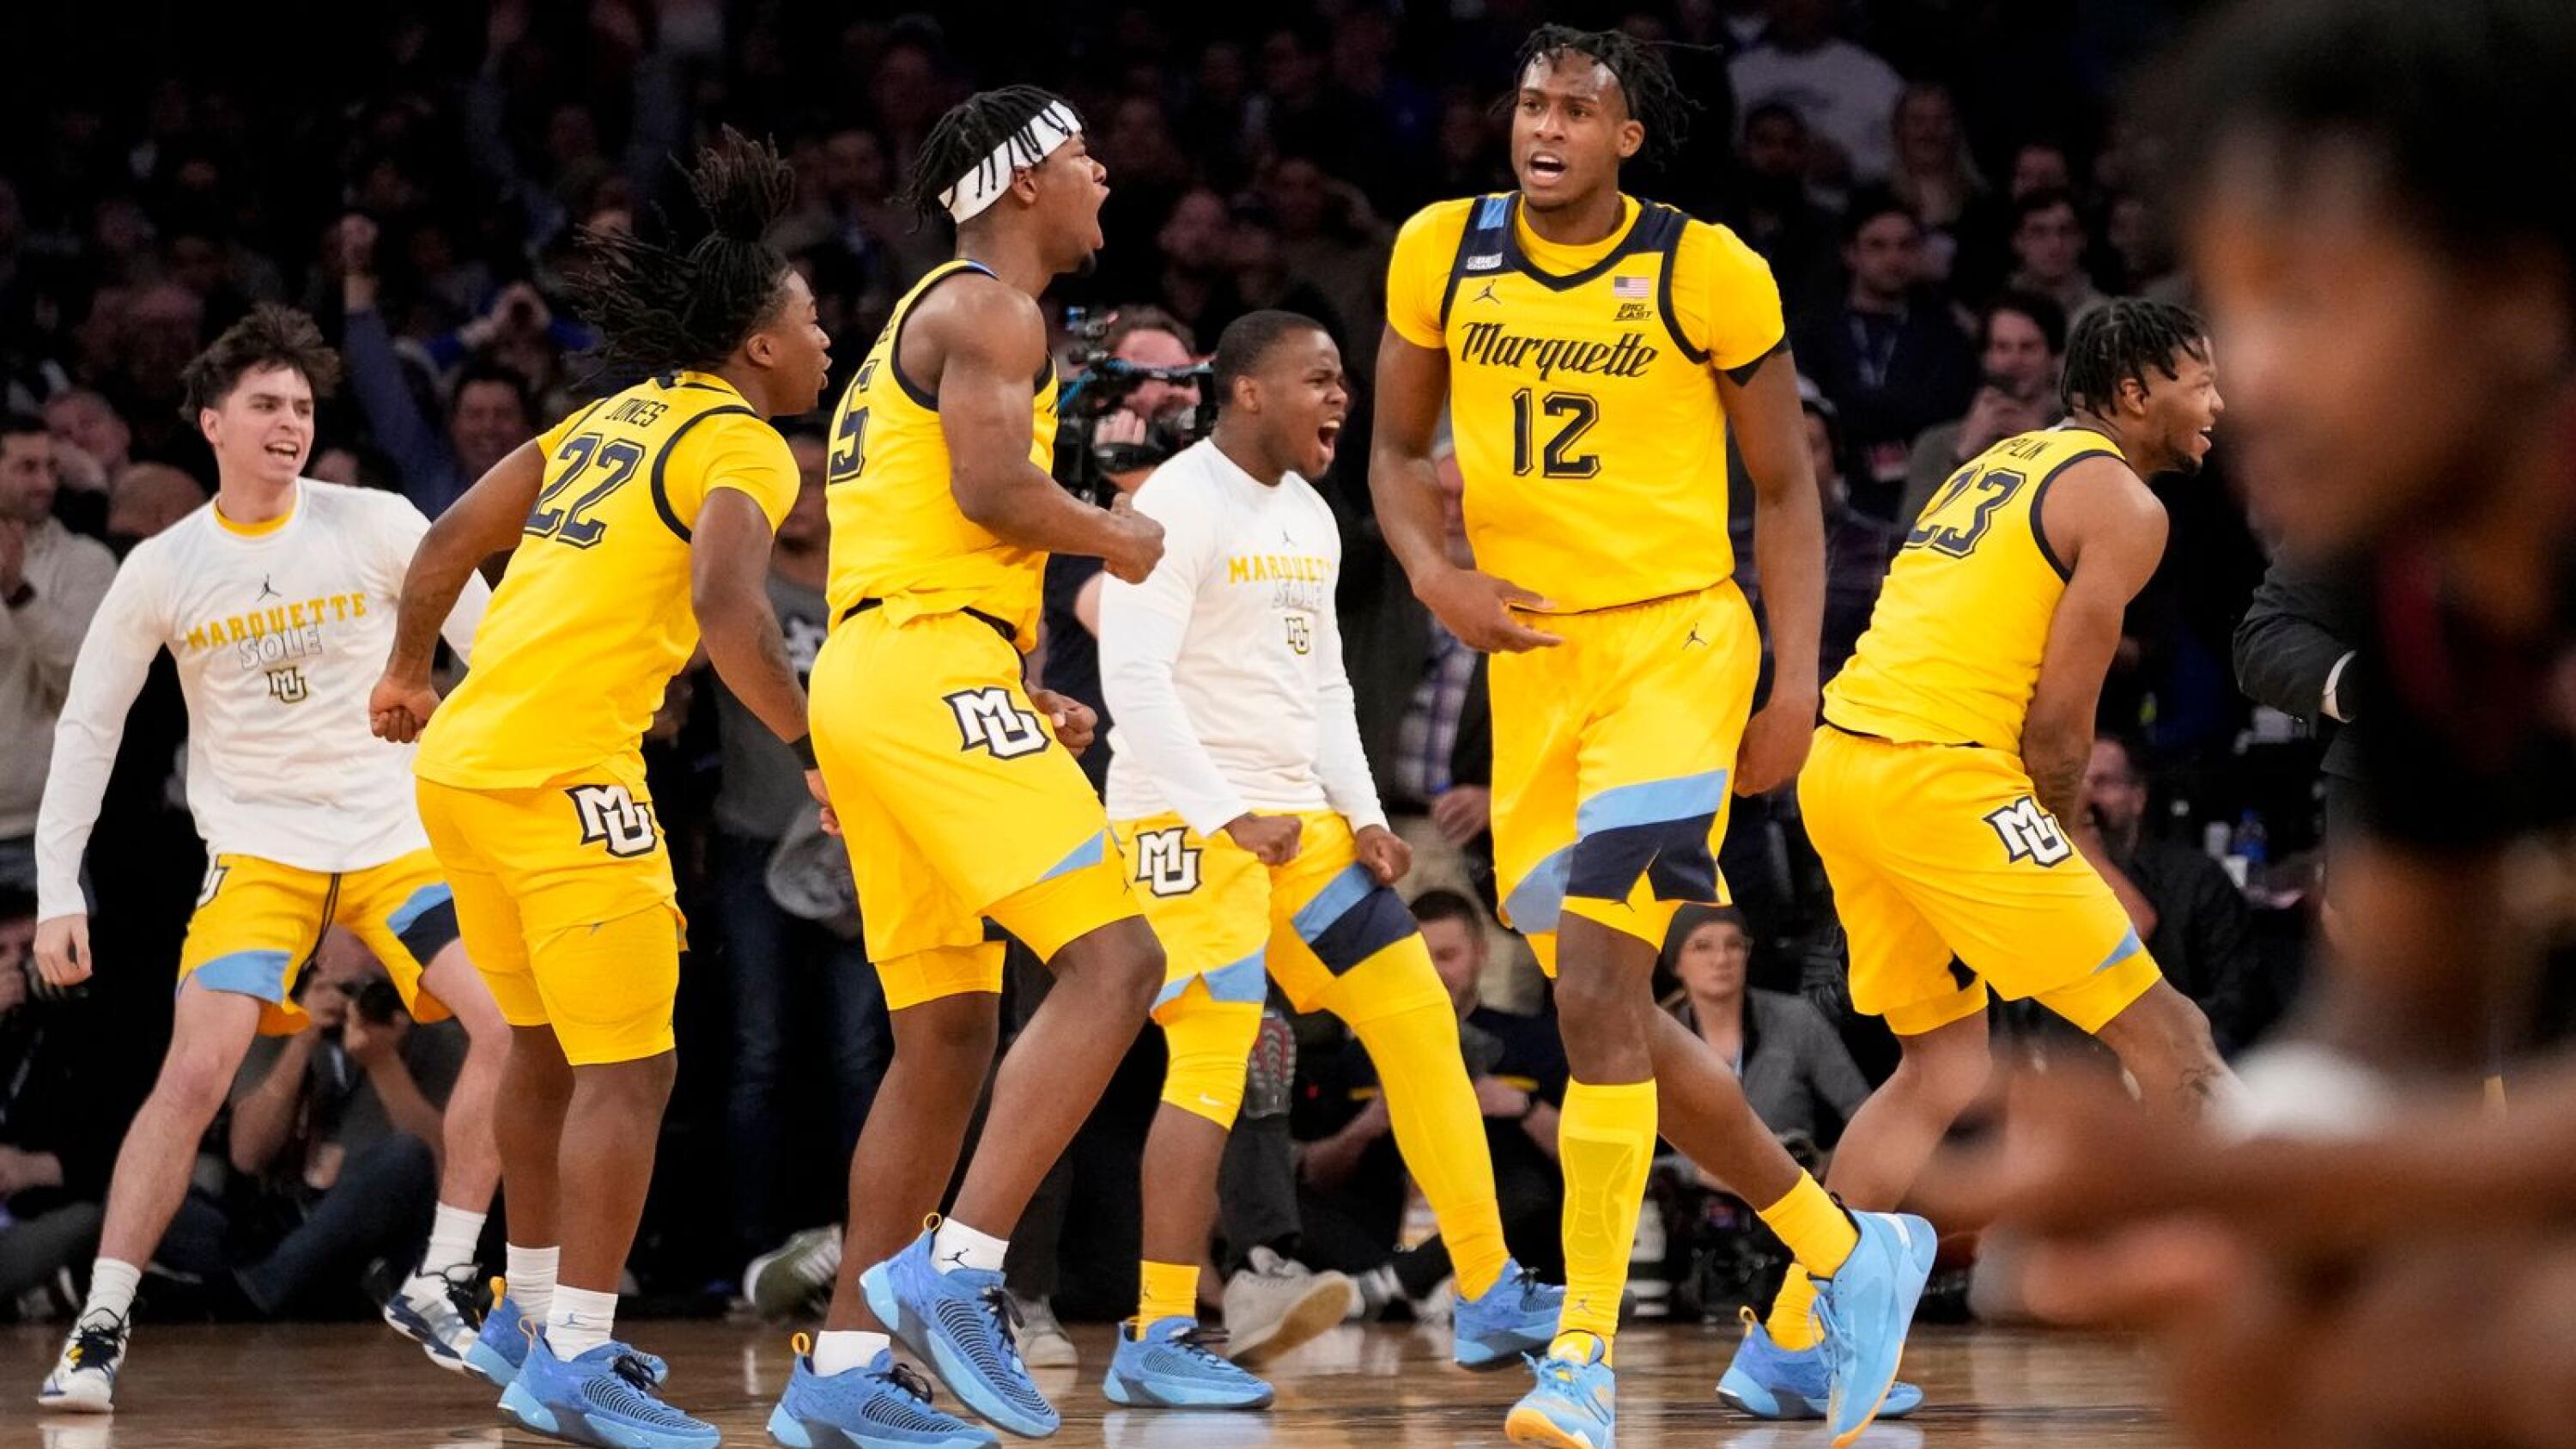 Top-seeded Marquette edges UConn 70-68 in Big East semis